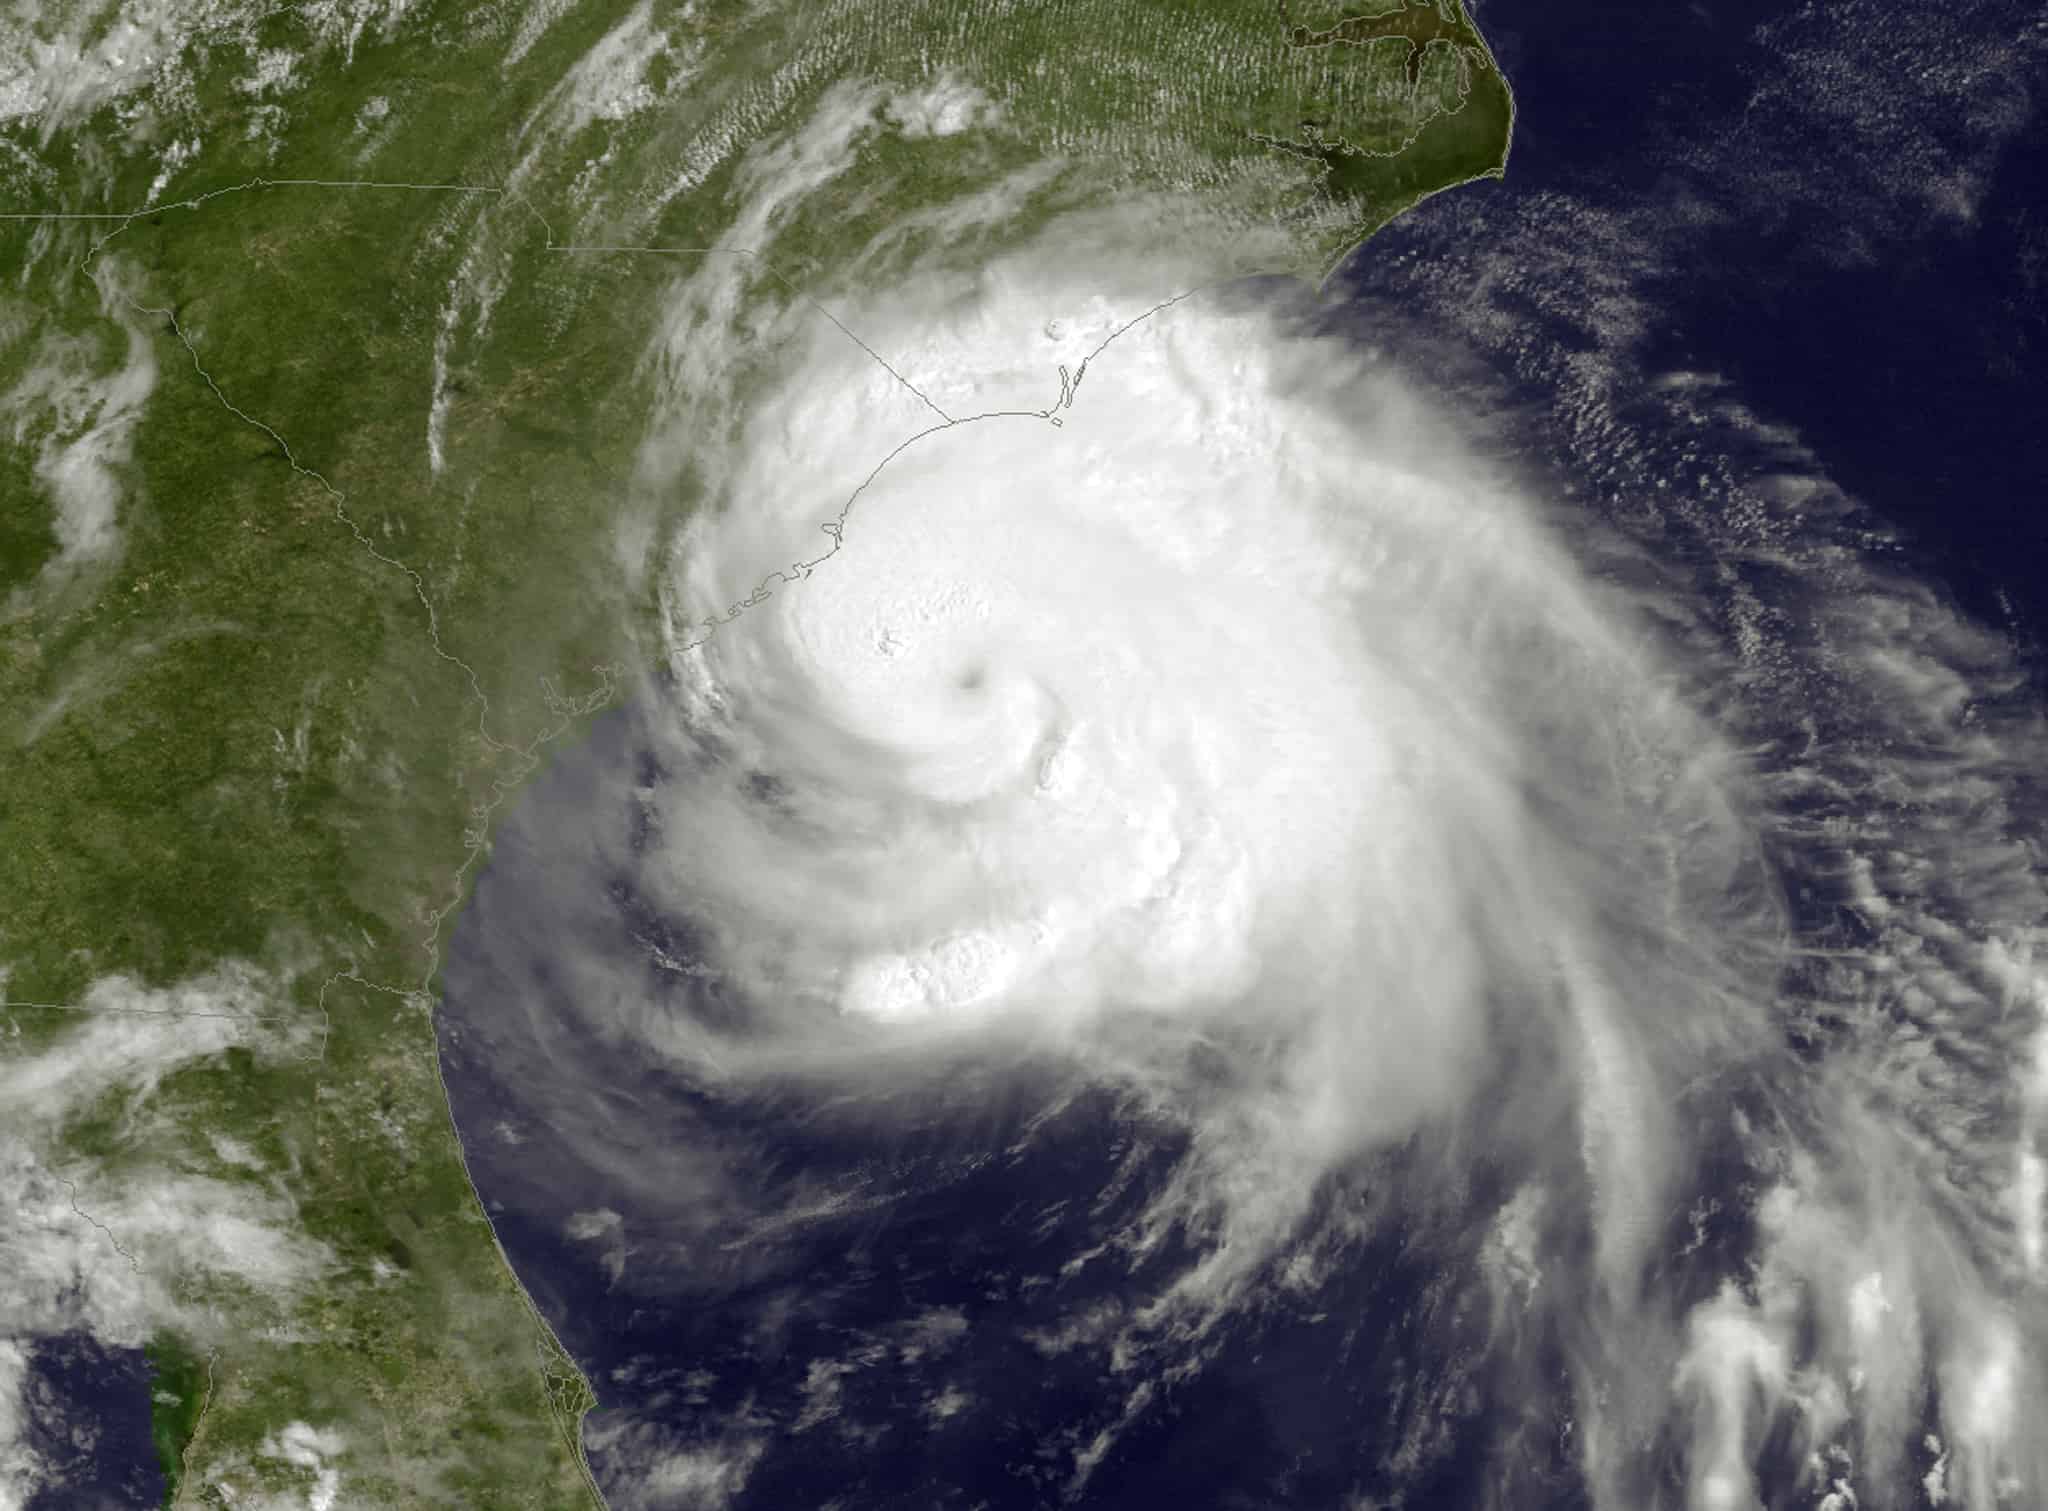 This National Oceanic and Atmospheric Administration (NOAA) satellite image taken at 2:45 p.m. on July 3, 2014 shows Hurricane Arthur.